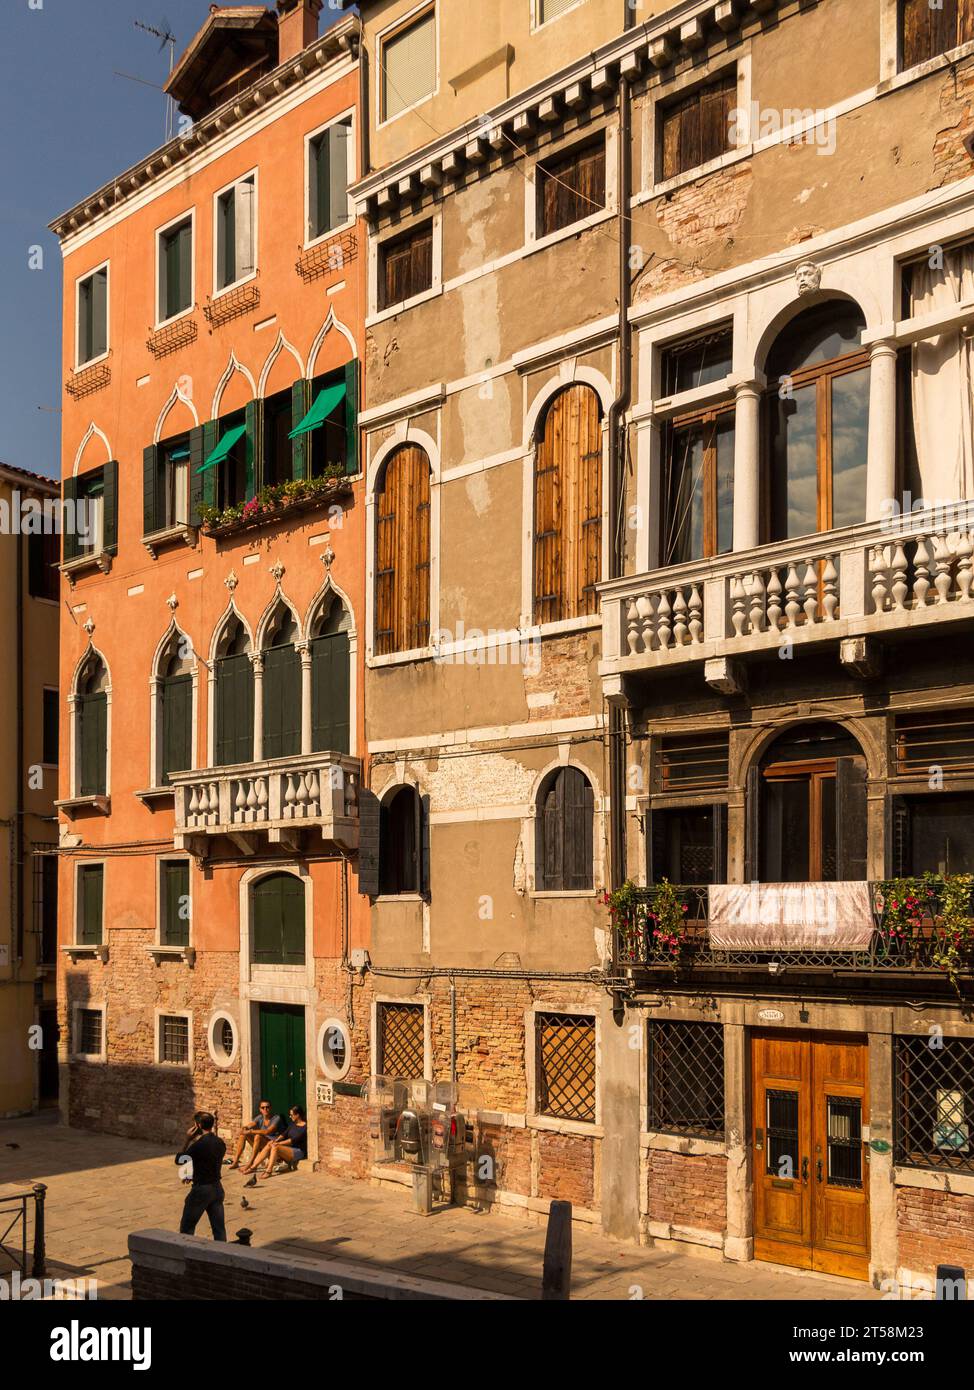 Houses of Venice in Italy. Two people are sitting in a portico while a third person wanders down the street. The ocher color predominates. Stock Photo